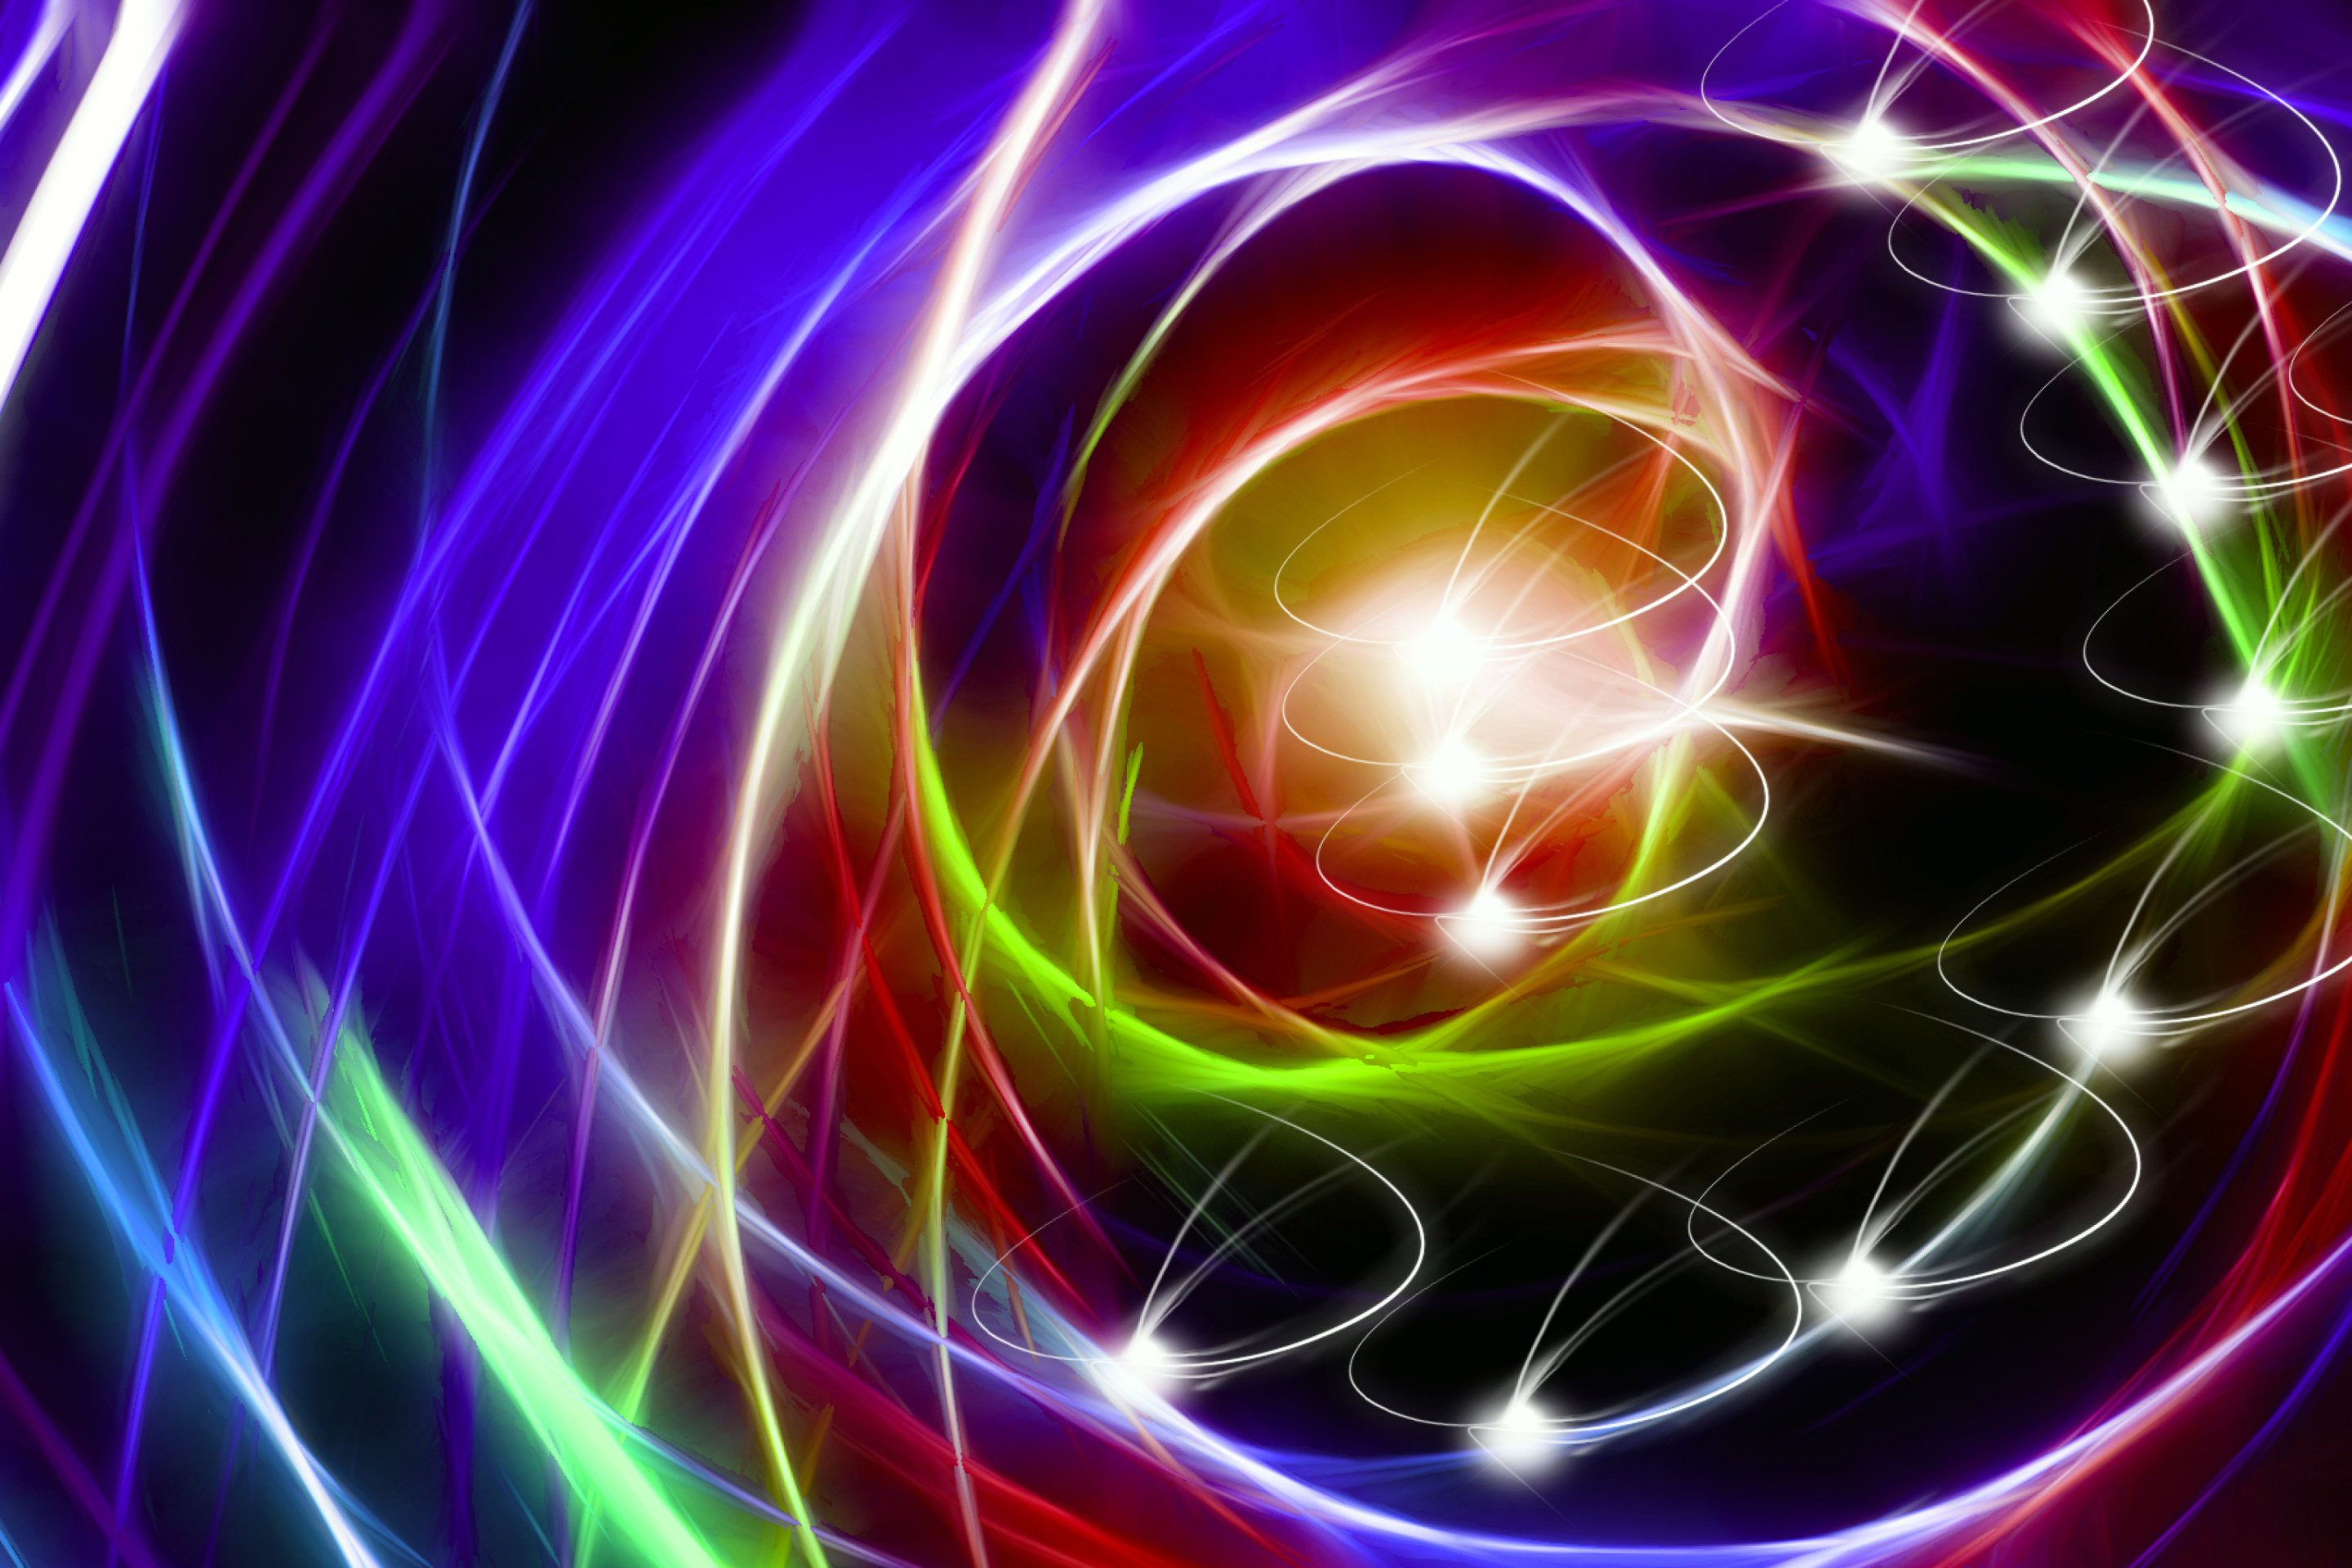 Abstraction chaos Rays wallpaper 2880x1920